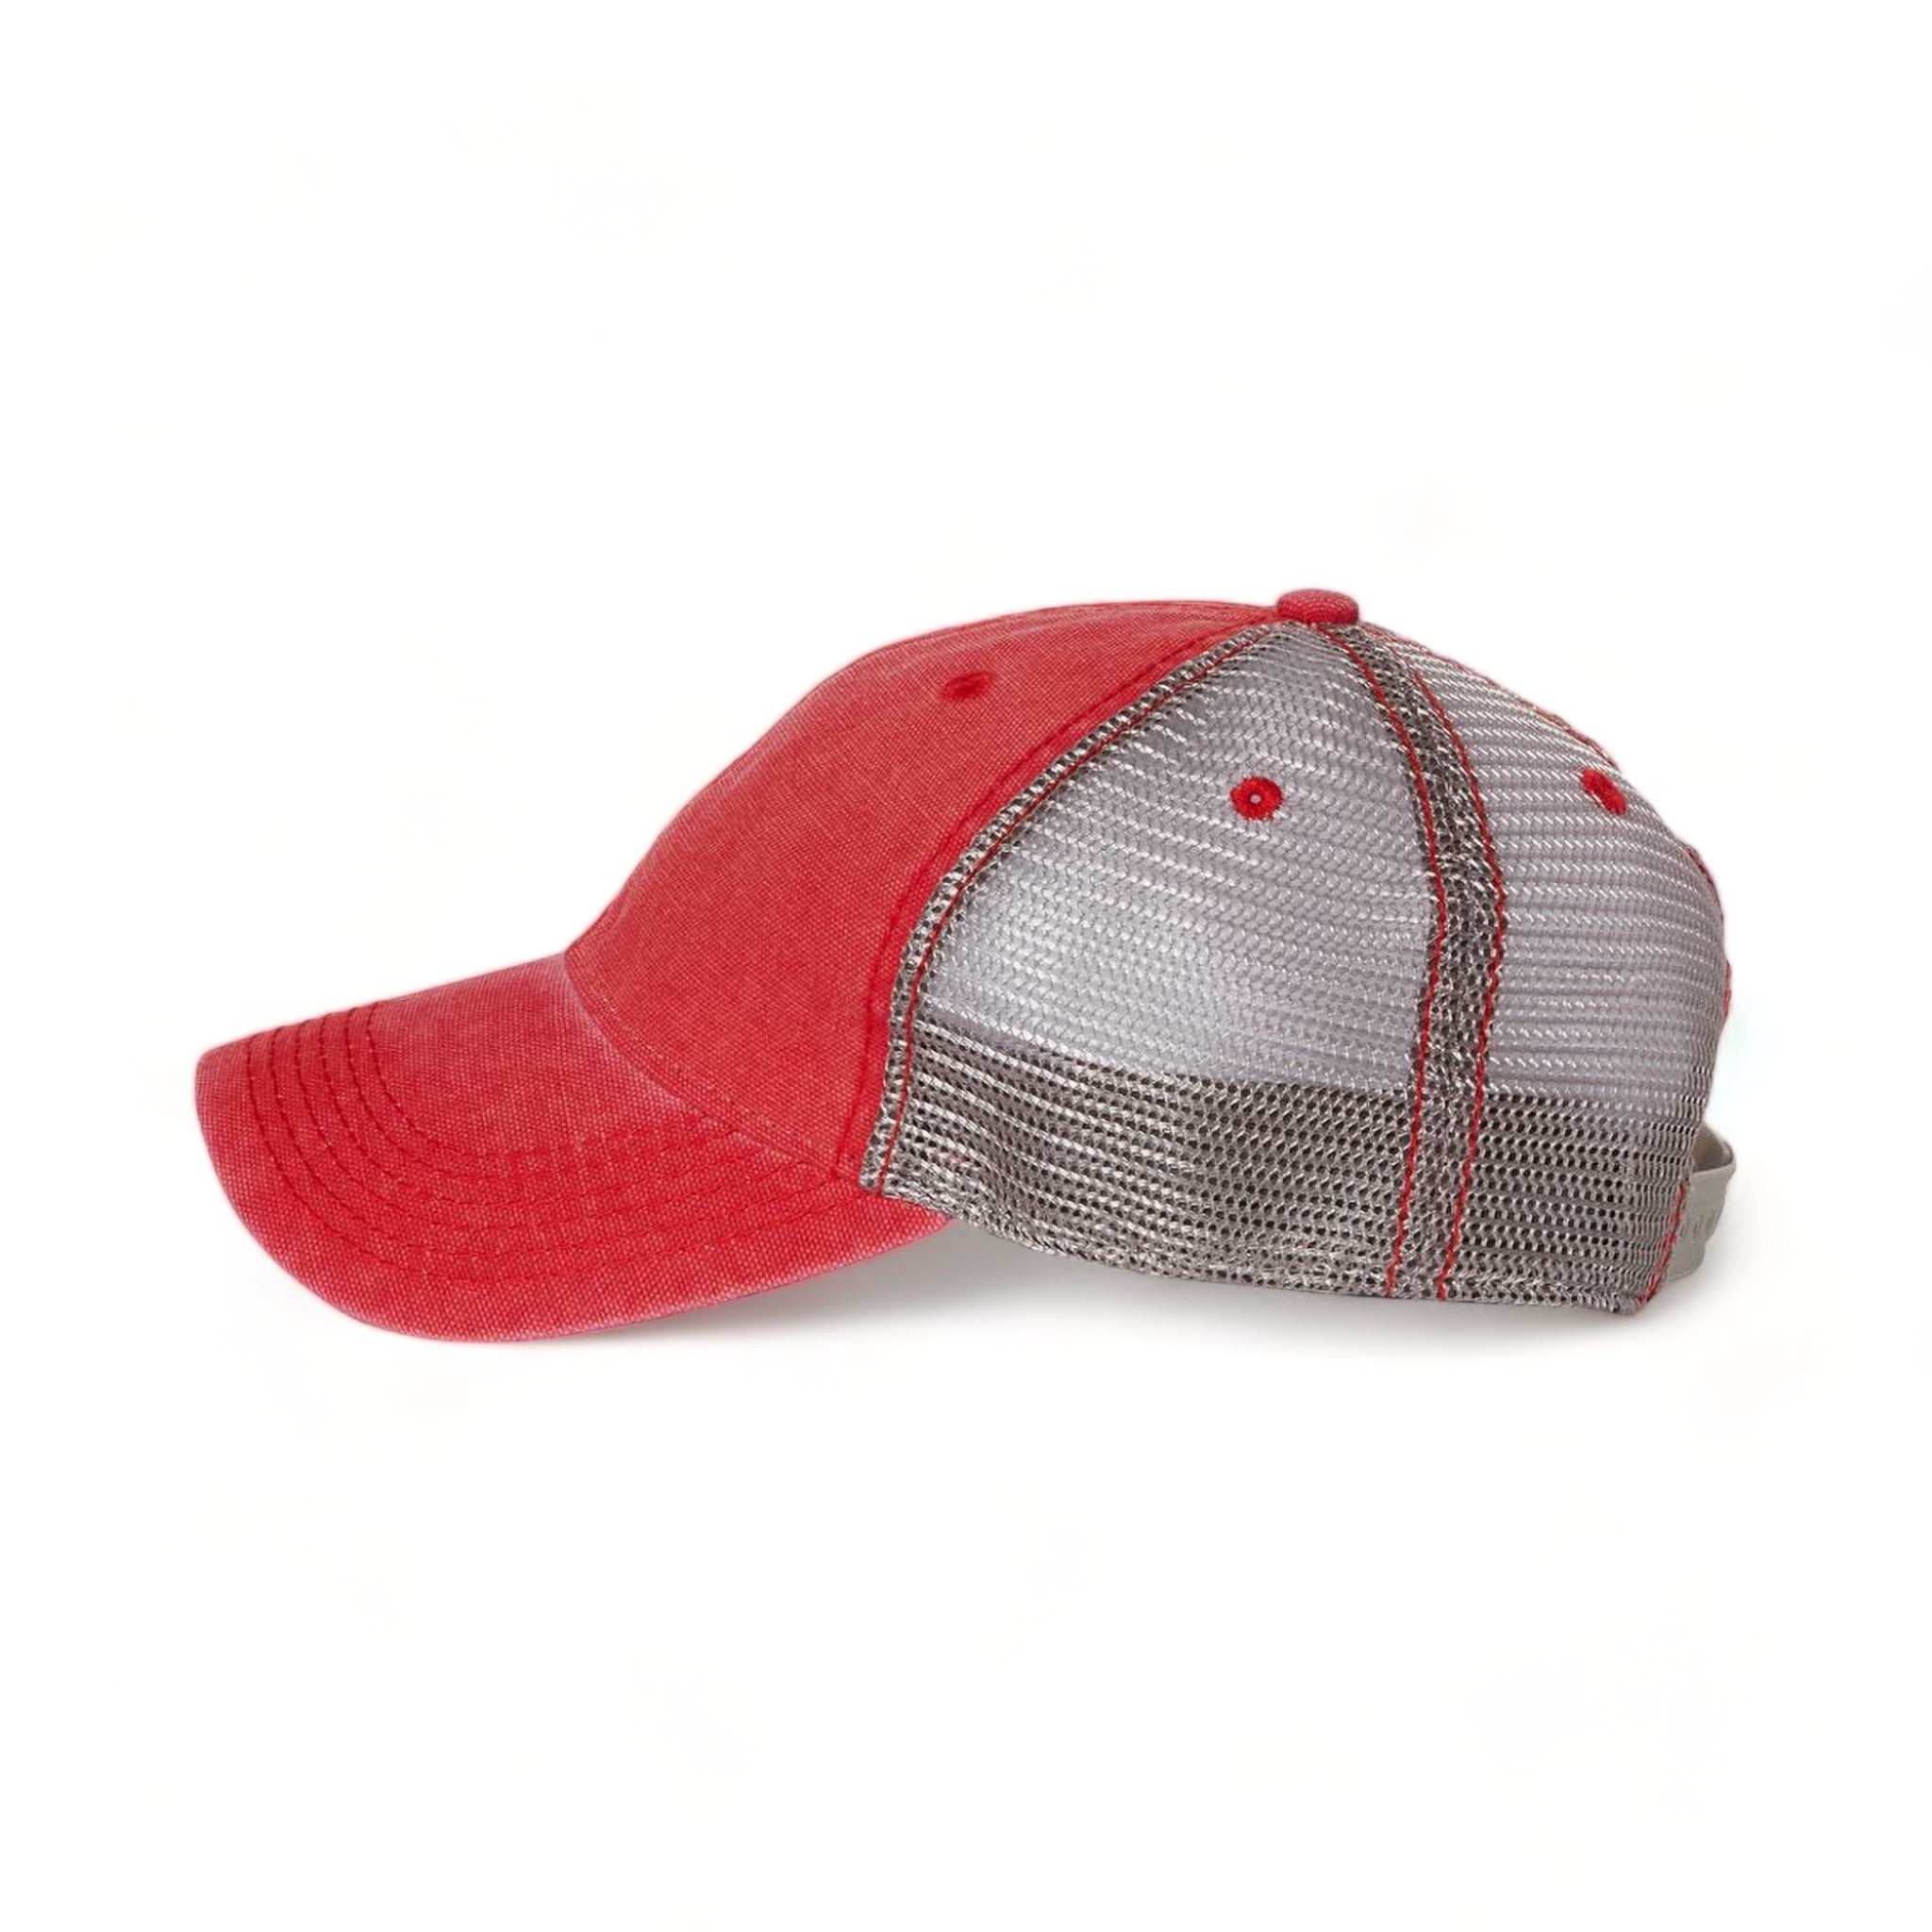 Side view of LEGACY DTA custom hat in scarlet red and grey